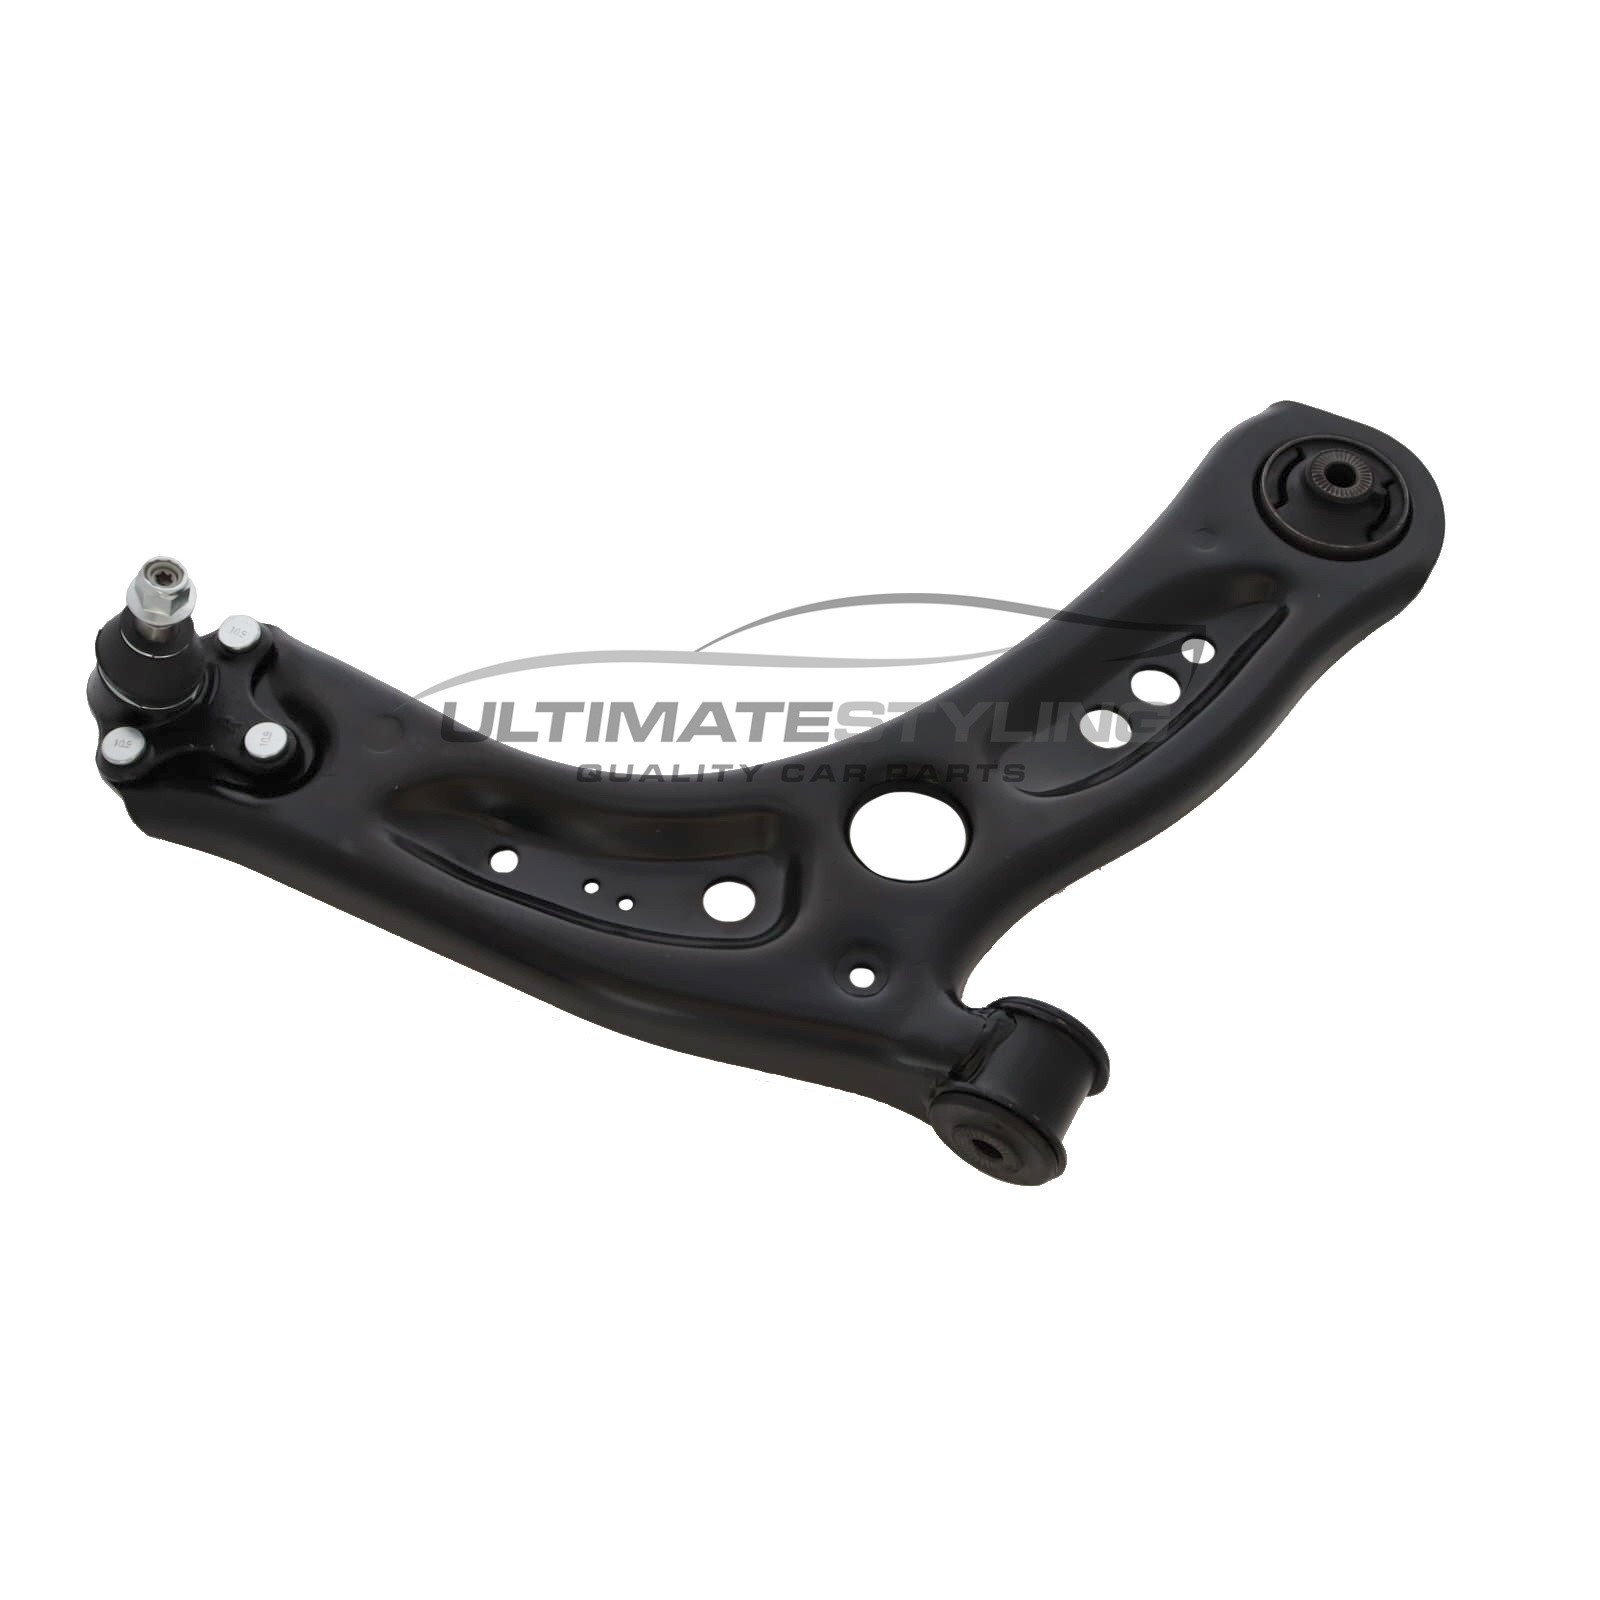 Suspension Arm - Front Lower (RH) for Audi A3 / RS3 / S3, Leon, Skoda  Octavia, Volkswagen and others